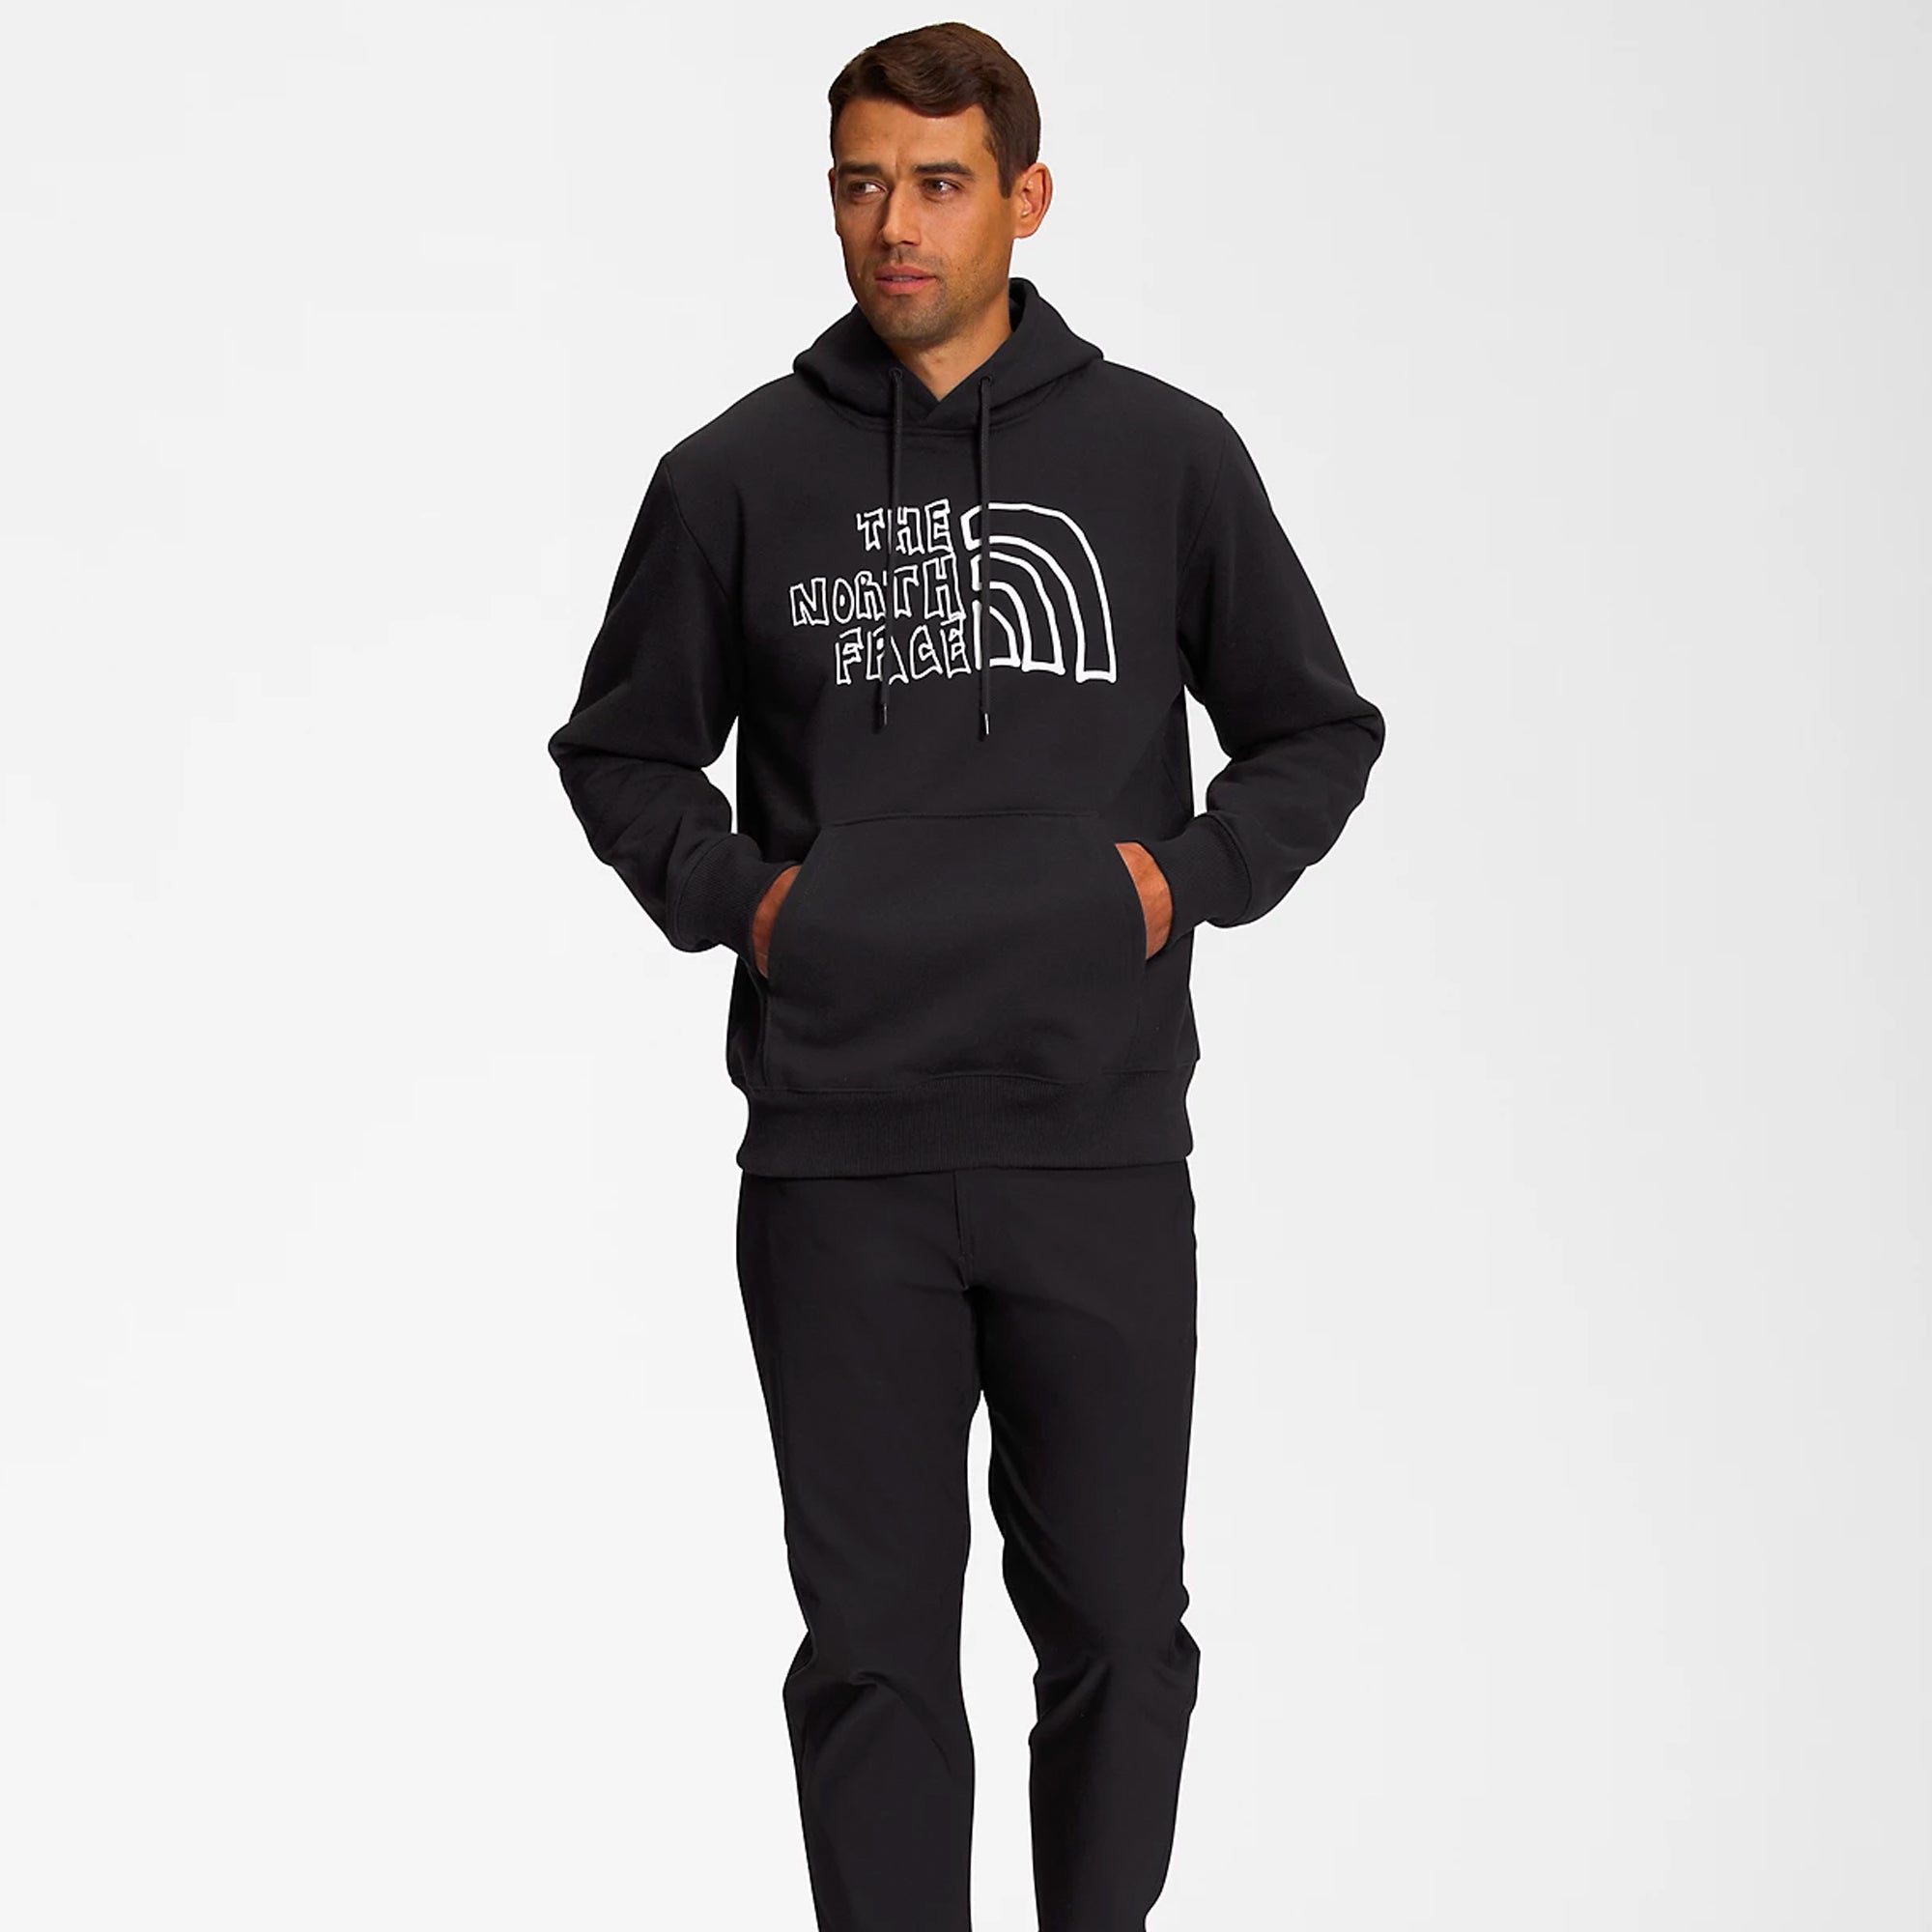 The North Face Mens Printed Heavyweight Pullover Hoodie